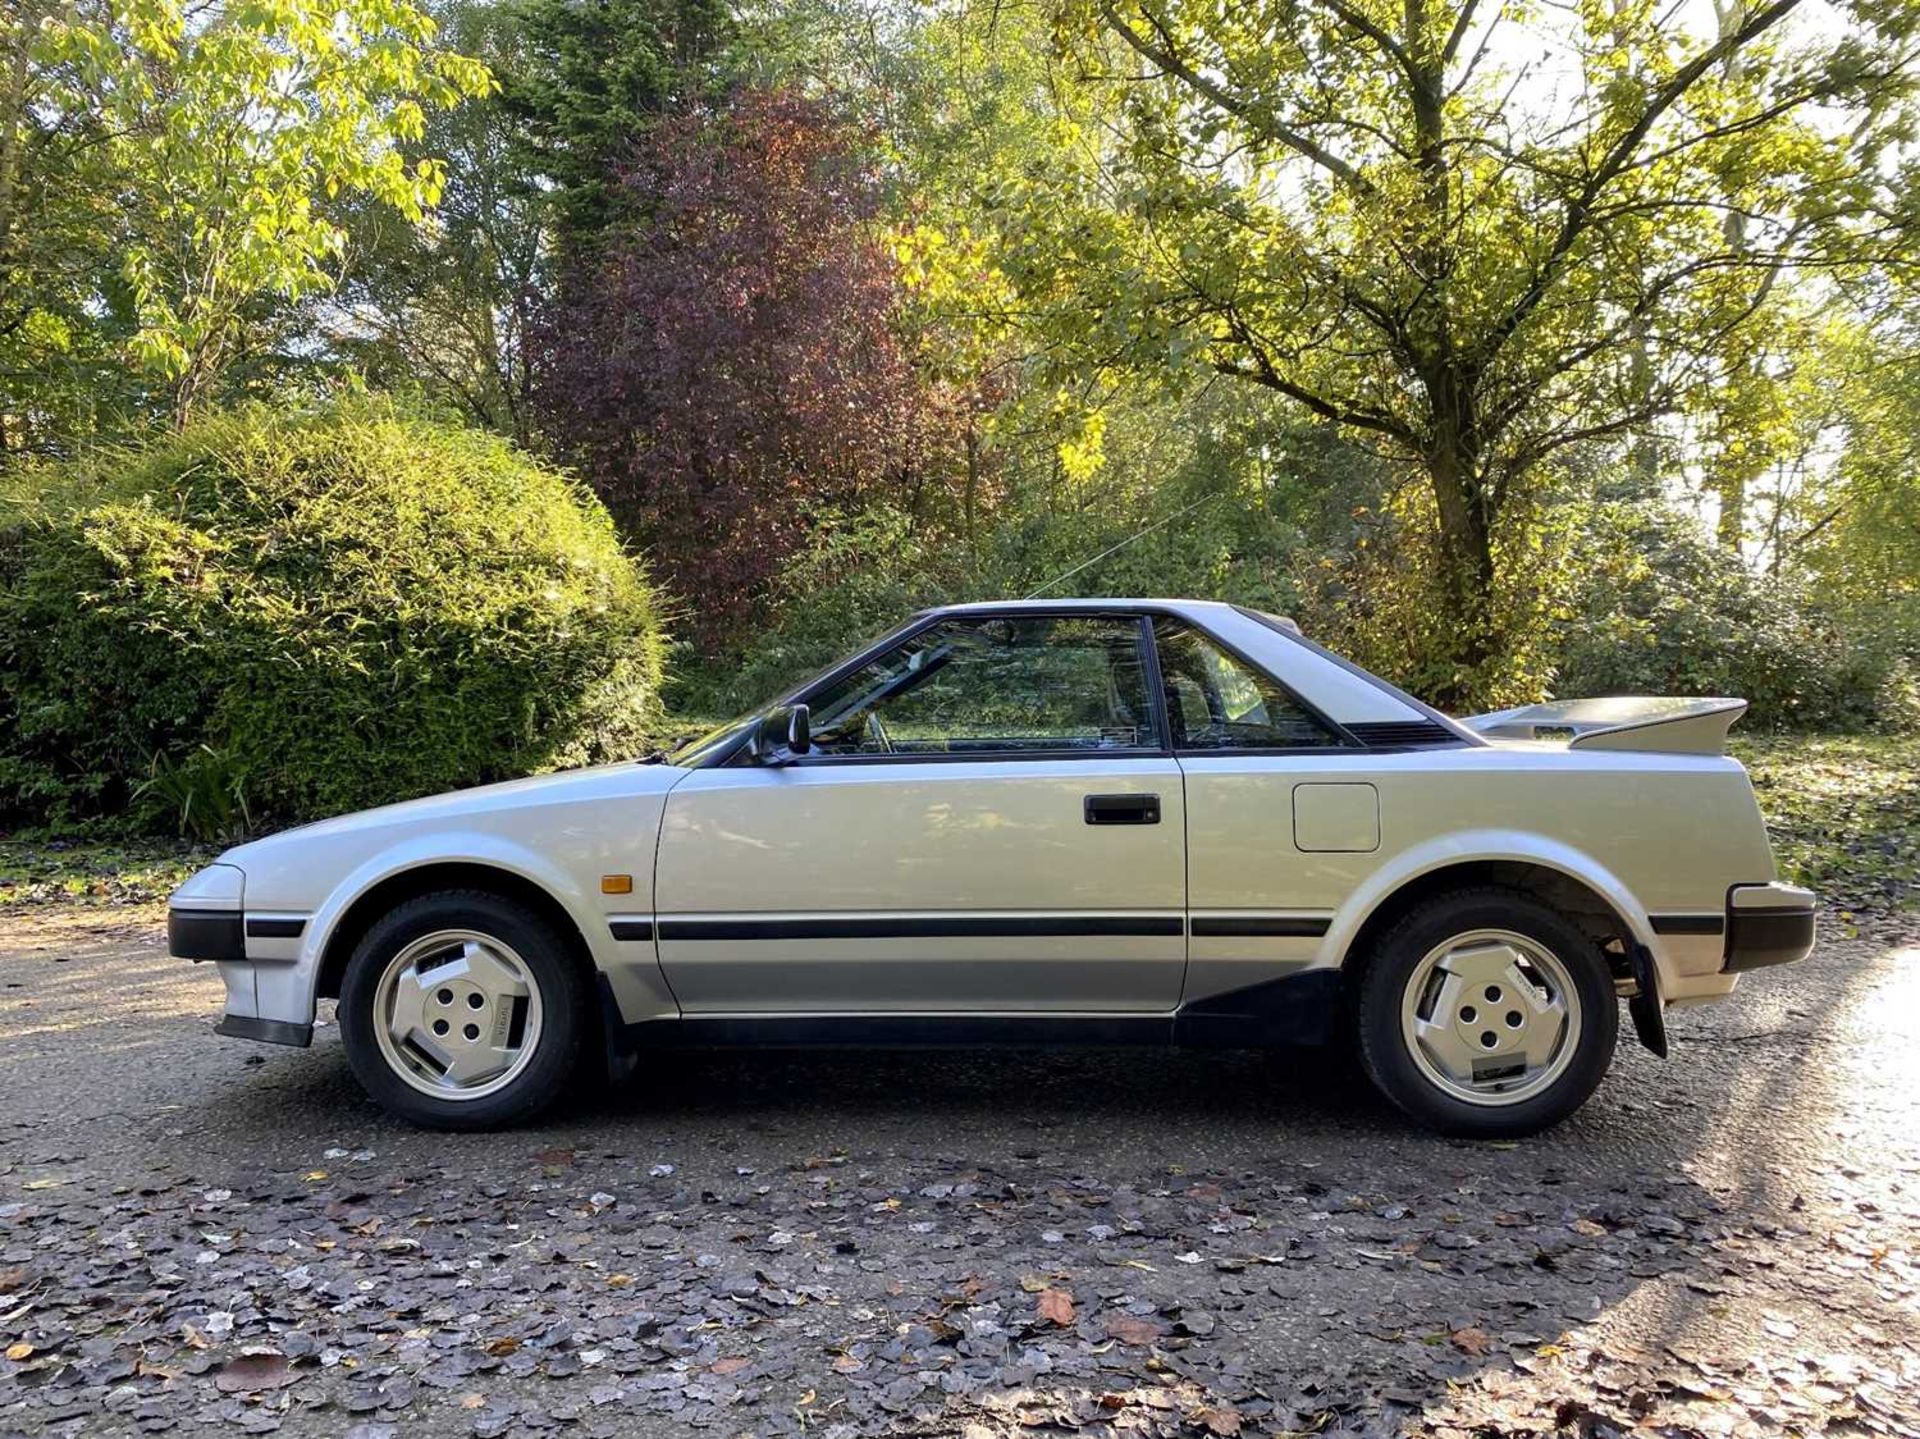 1985 Toyota MR2 Coupe Restored example of an appreciating modern classic - Image 12 of 100